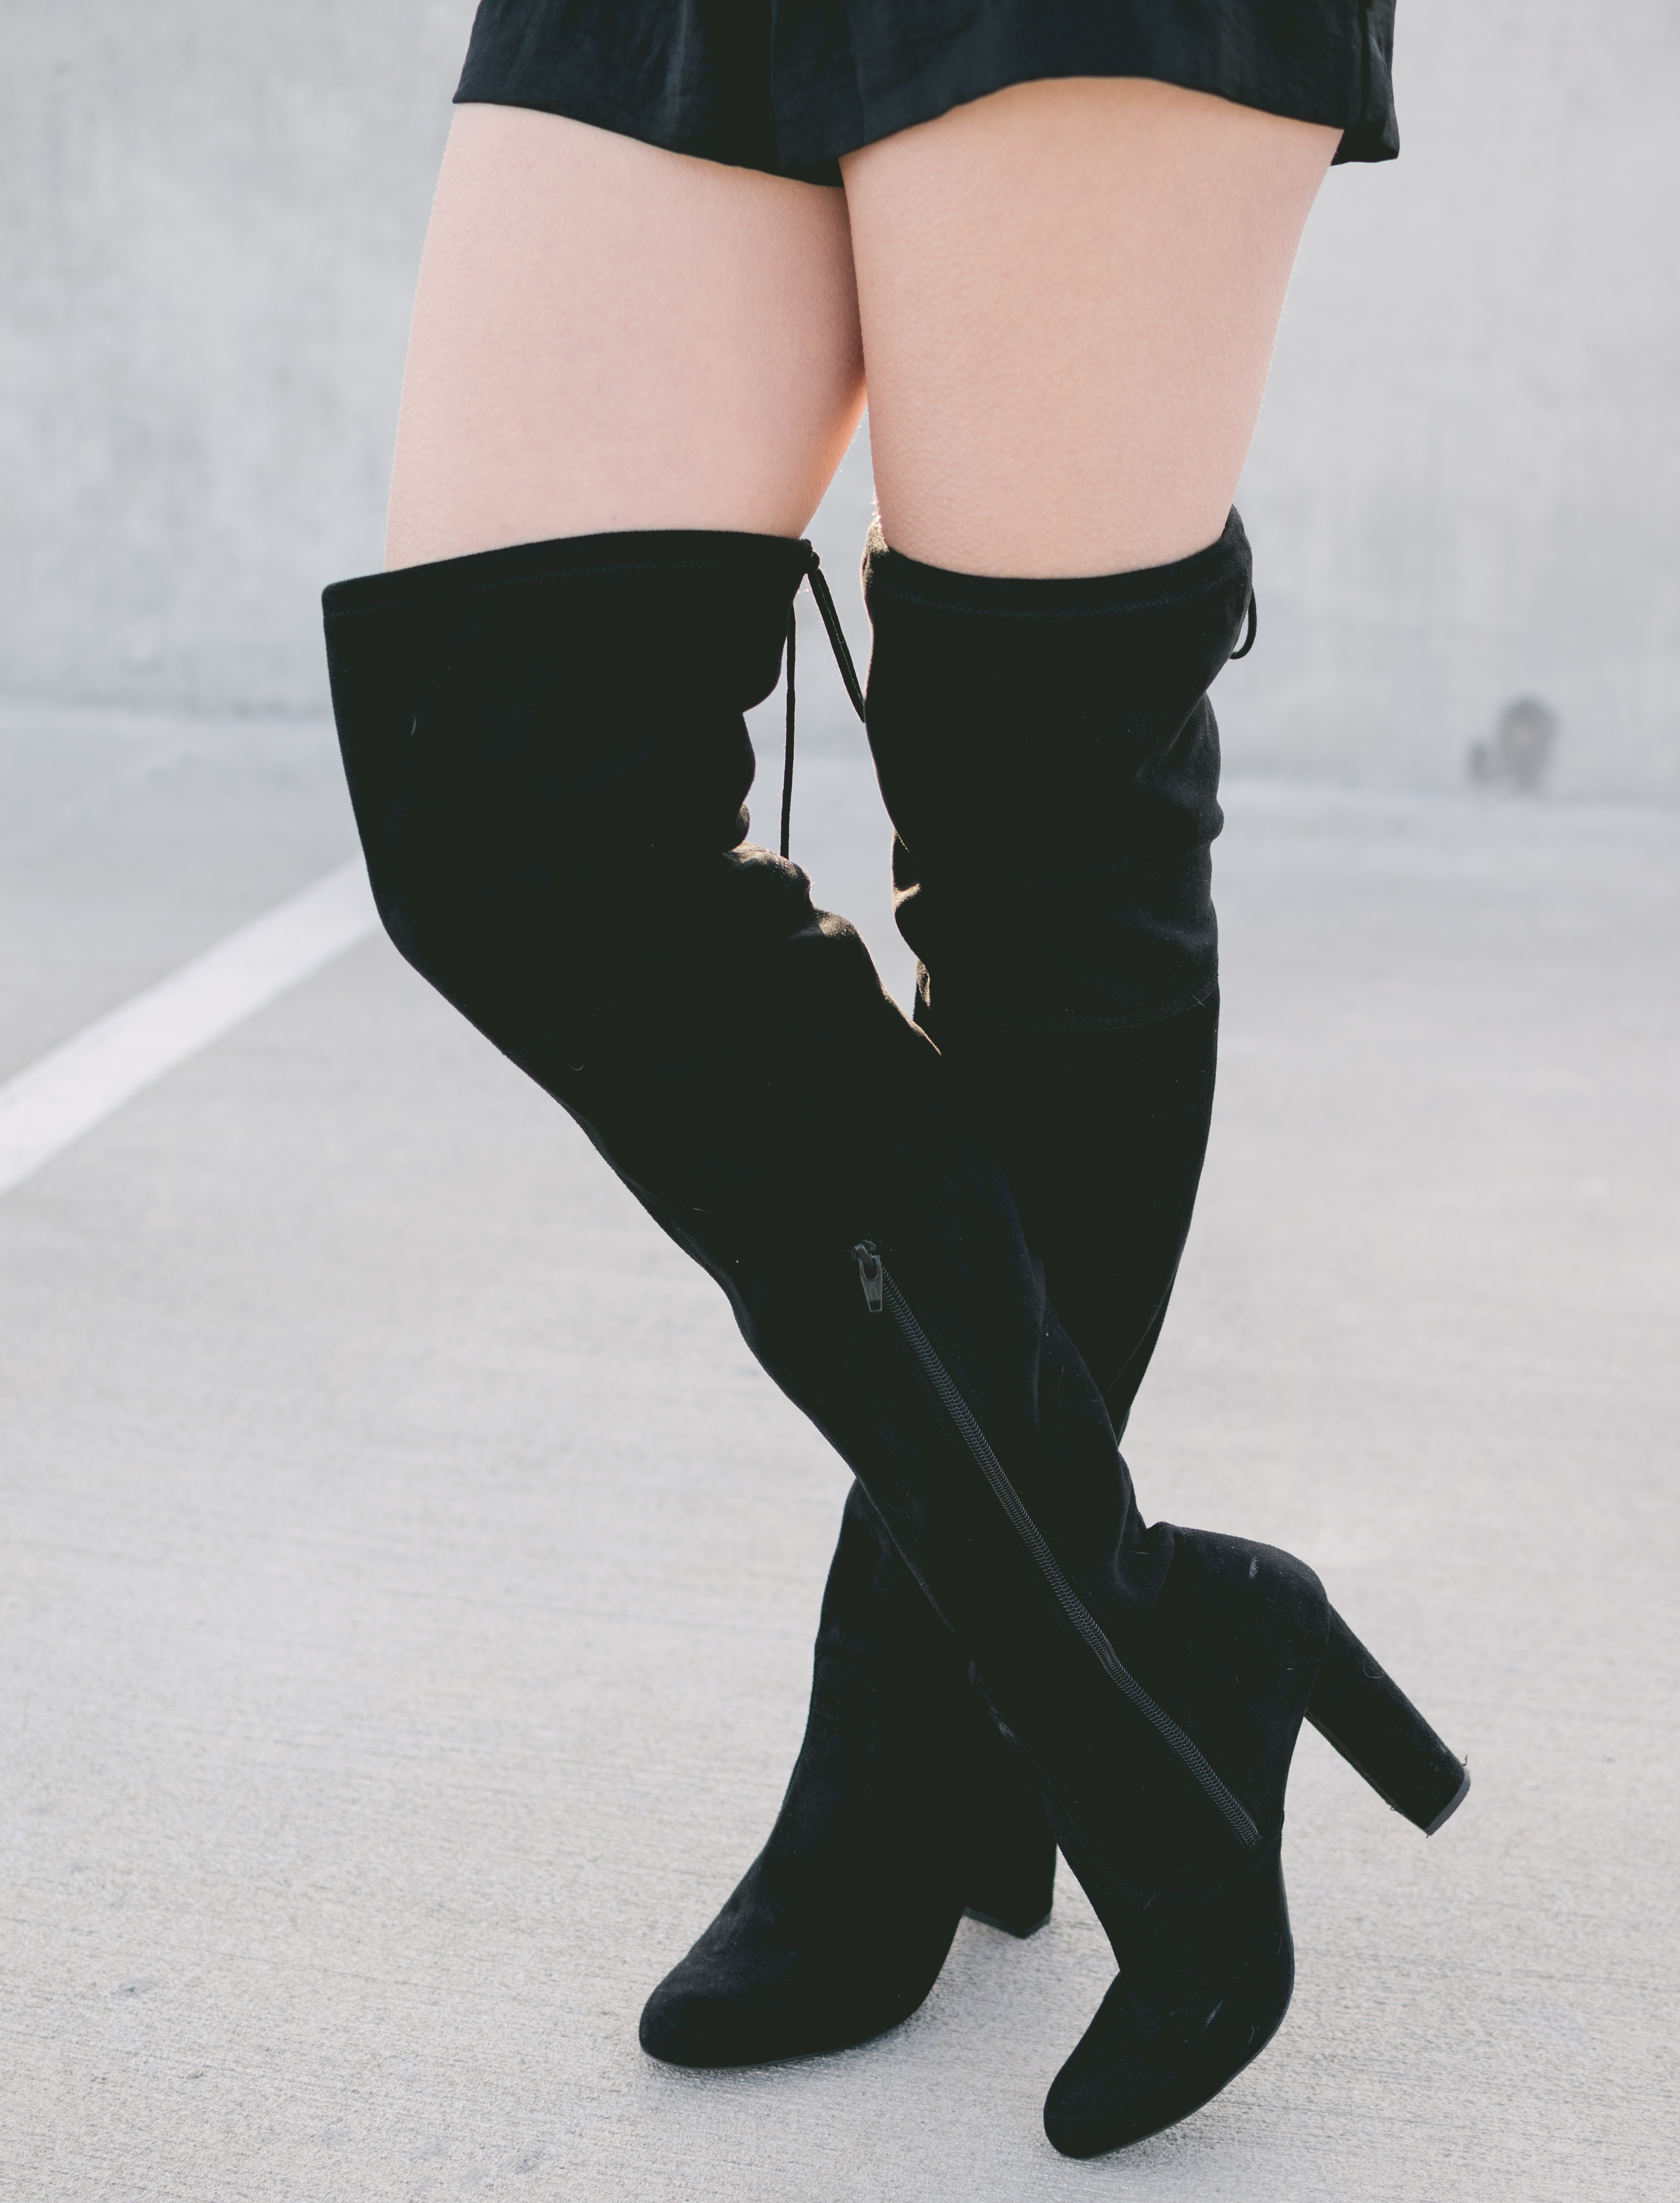 Black knee high boots perfect for new years